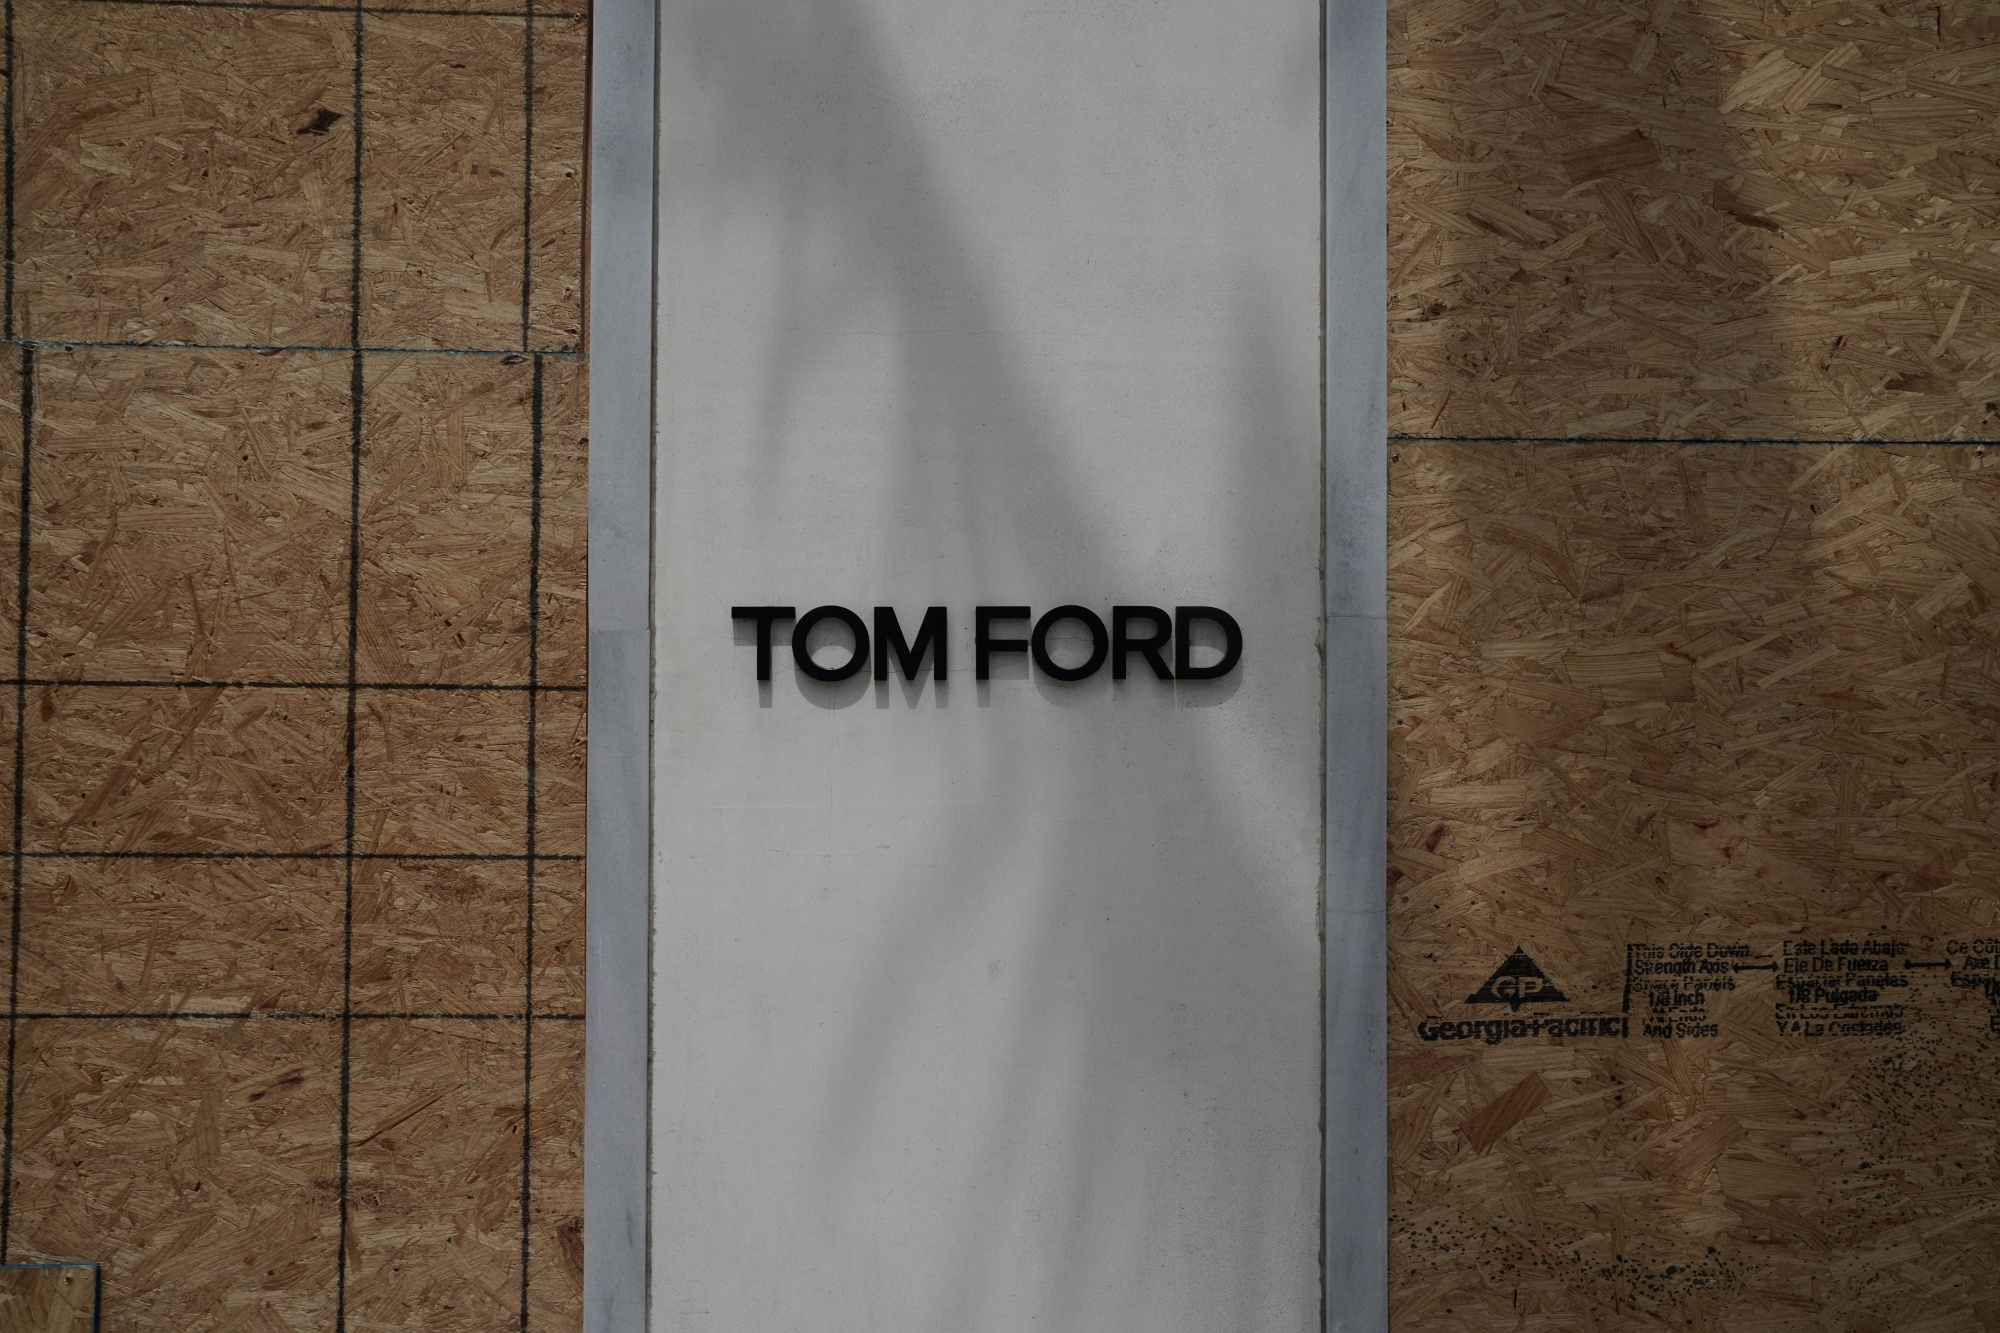 Tom Ford Partners With Net-a-Porter to Finally Sell Ready-to-Wear